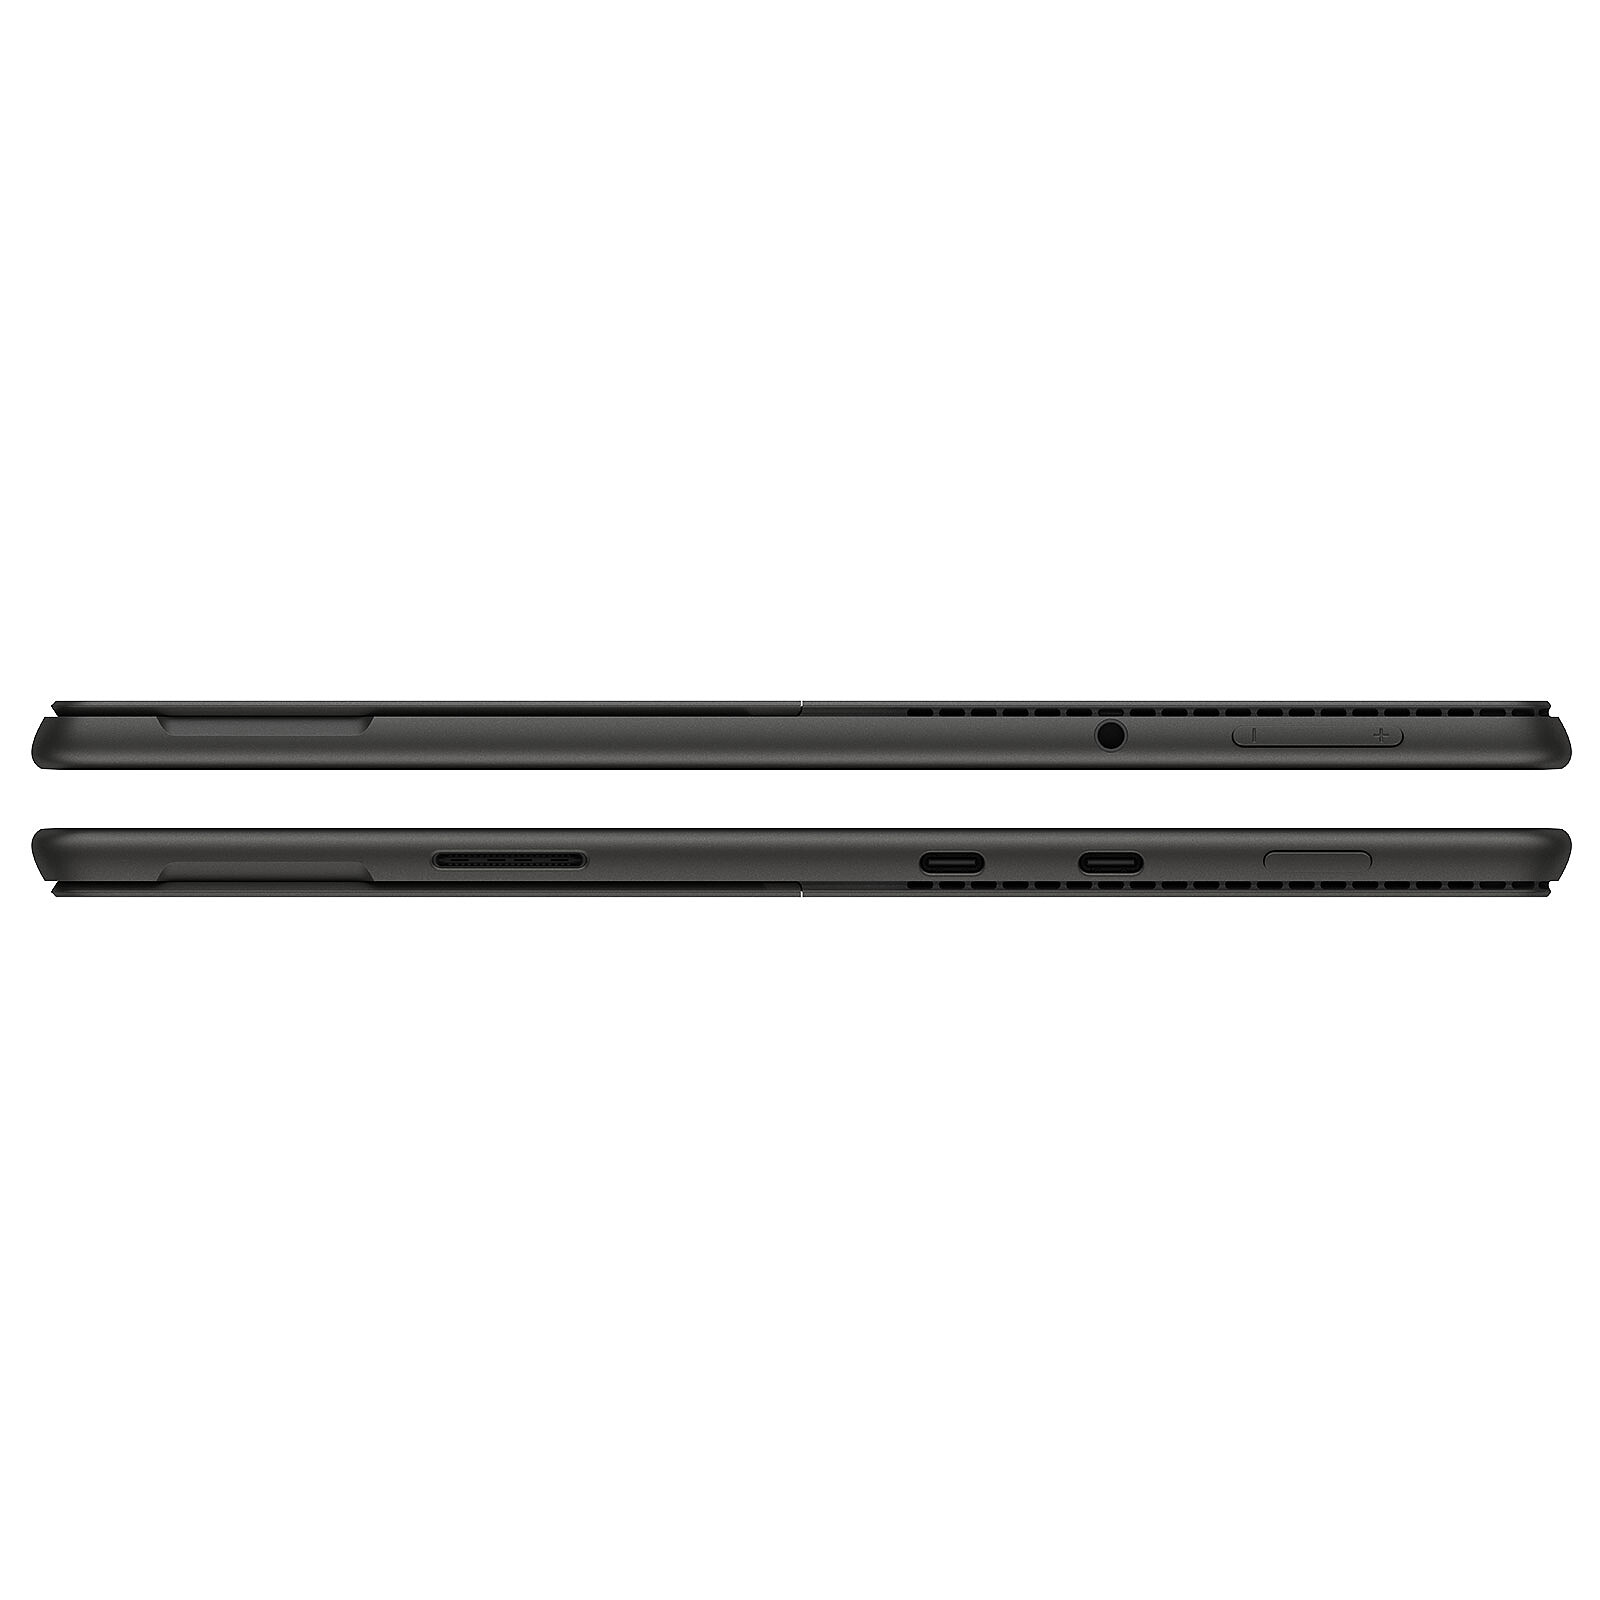 Microsoft Surface Pro 8 for Business review